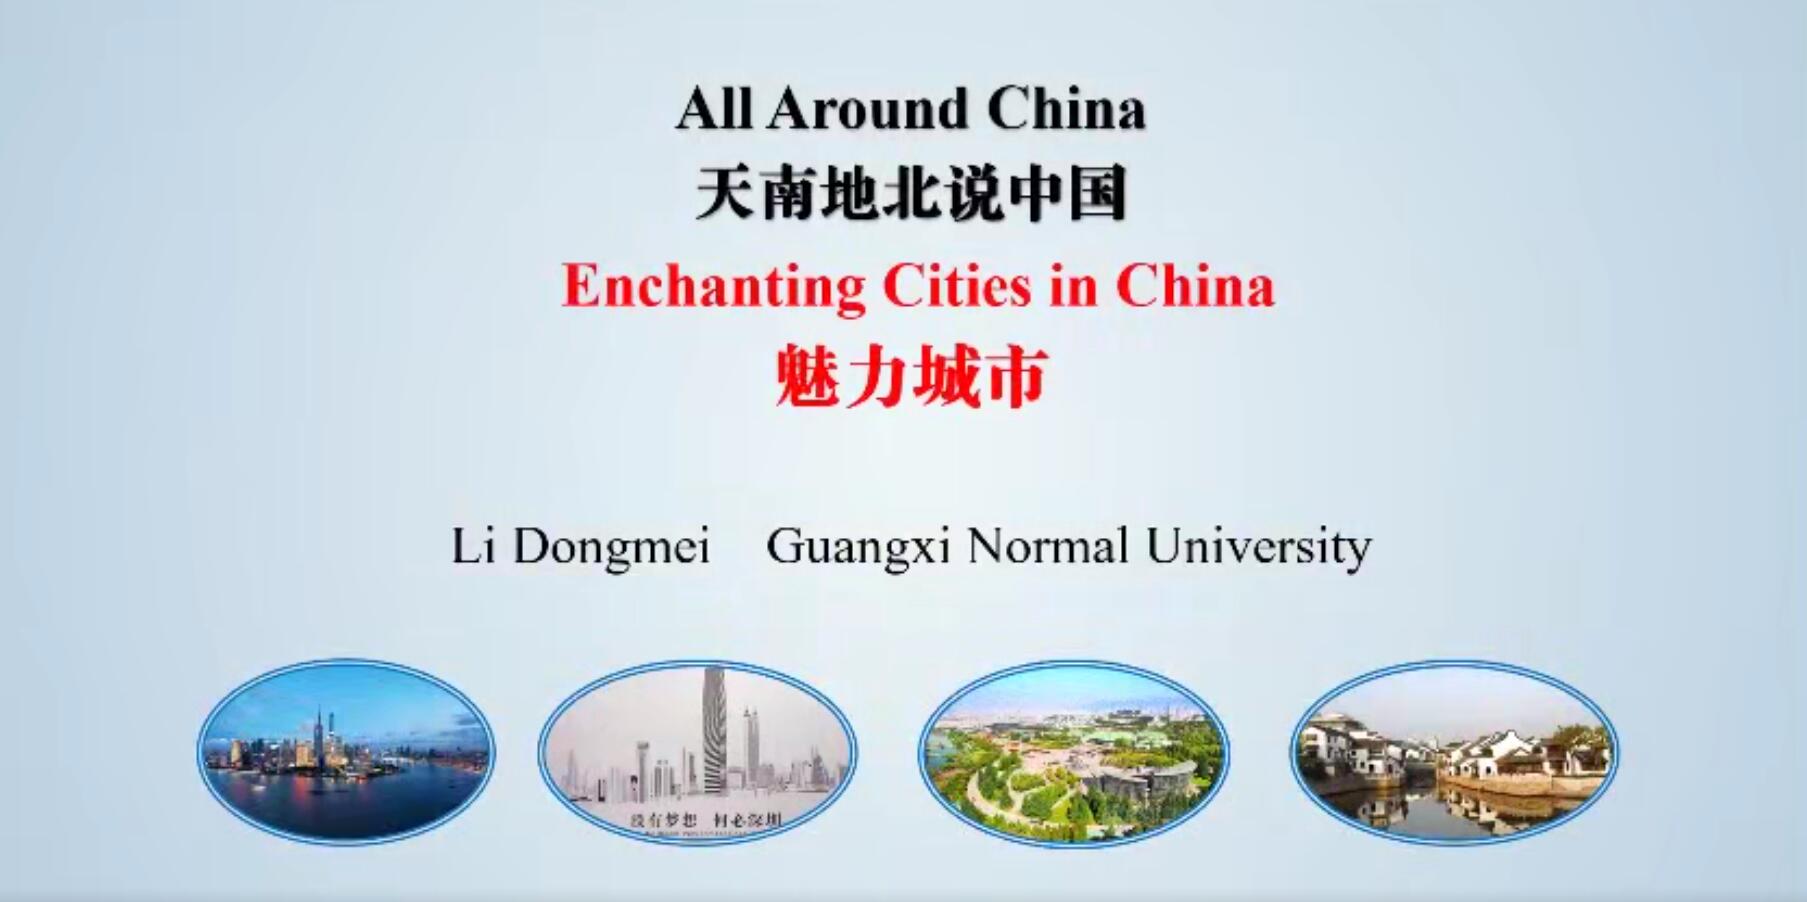 Chapter 7：Enchanting Cities in China